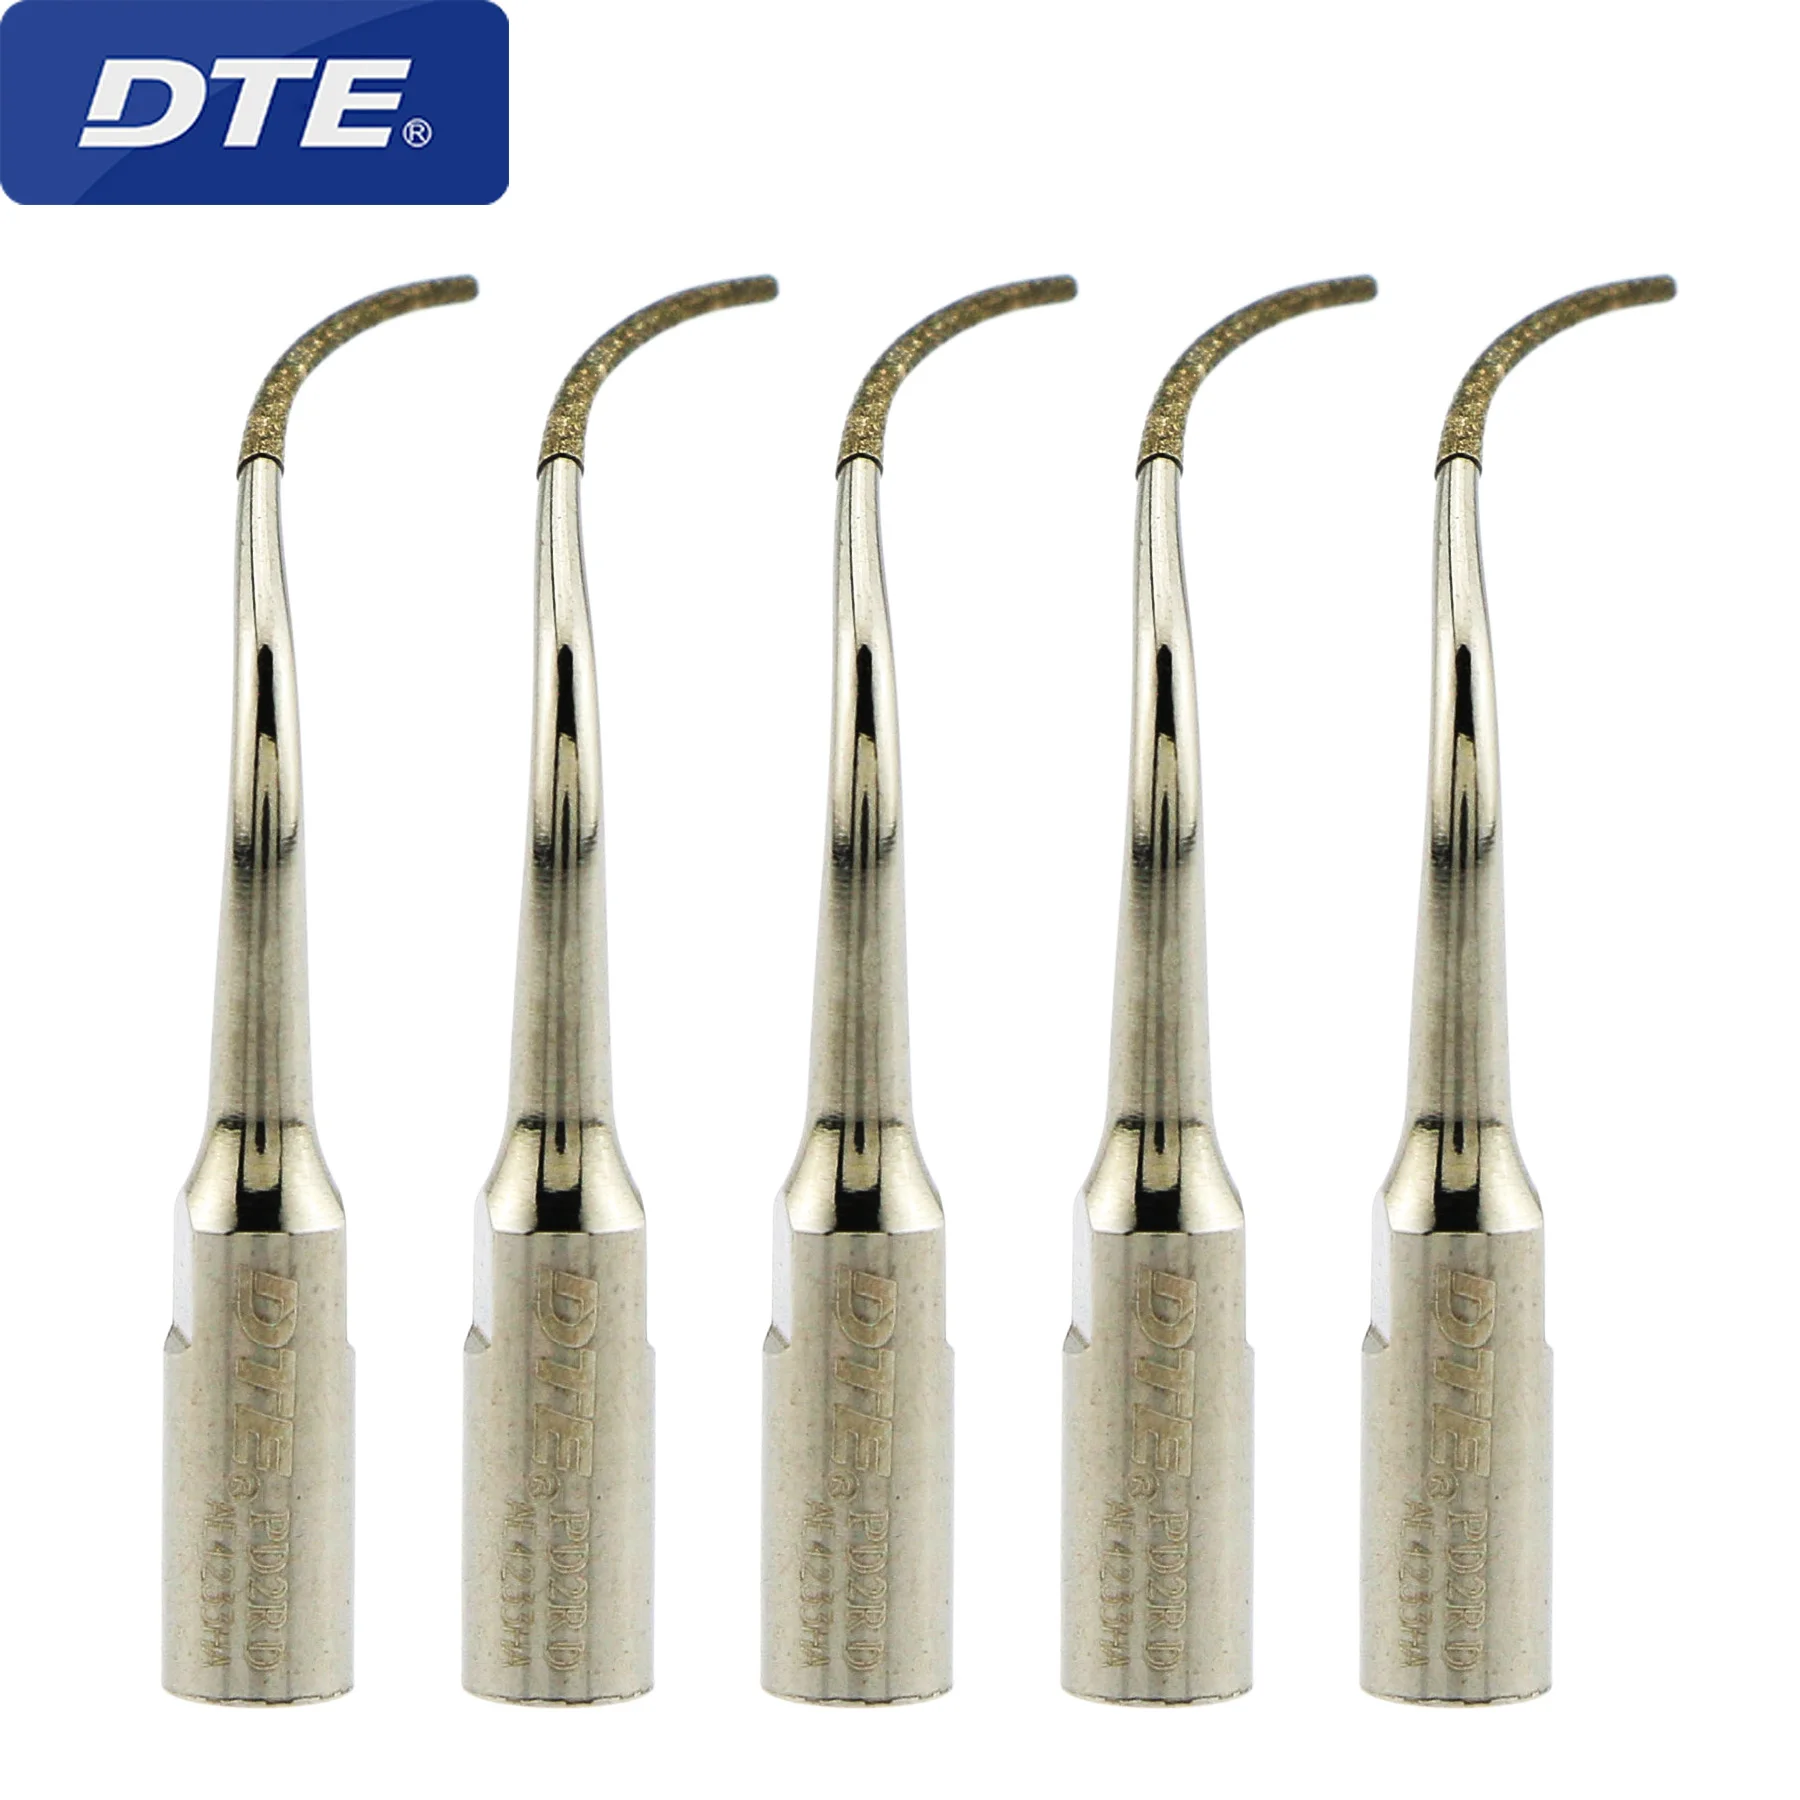 5 Pcs DTE Dental Ultrasonic Scaler Periodontal Scaling Tips PD2RD Compatible Satelec NSK